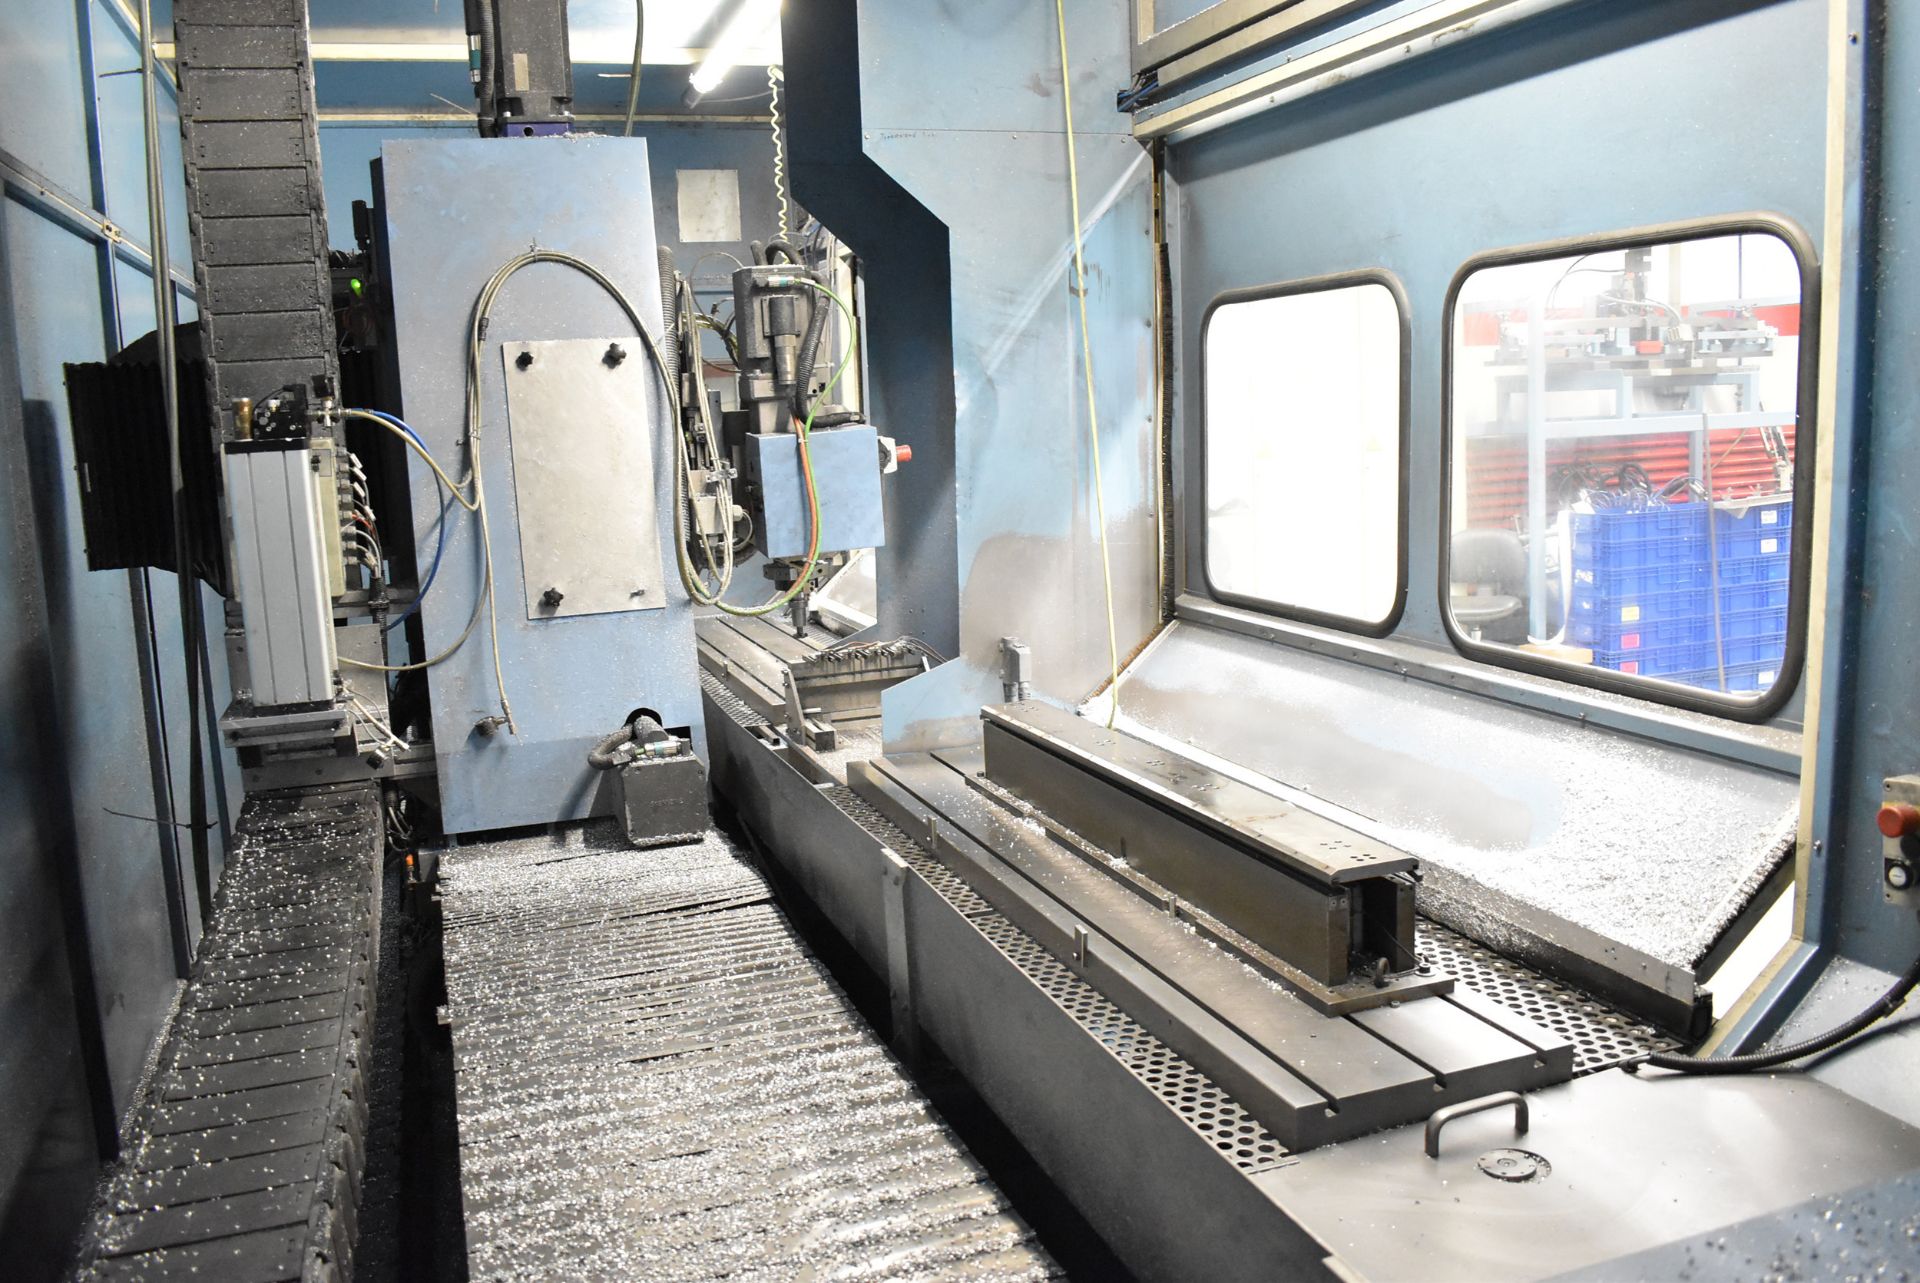 MAKA 7 AXIS CNC MACHINING CENTER WITH SIEMENS SINEUMERIK TOUCH SCREEN CNC CONTROL, FULL SOUNDPROOF - Image 4 of 9